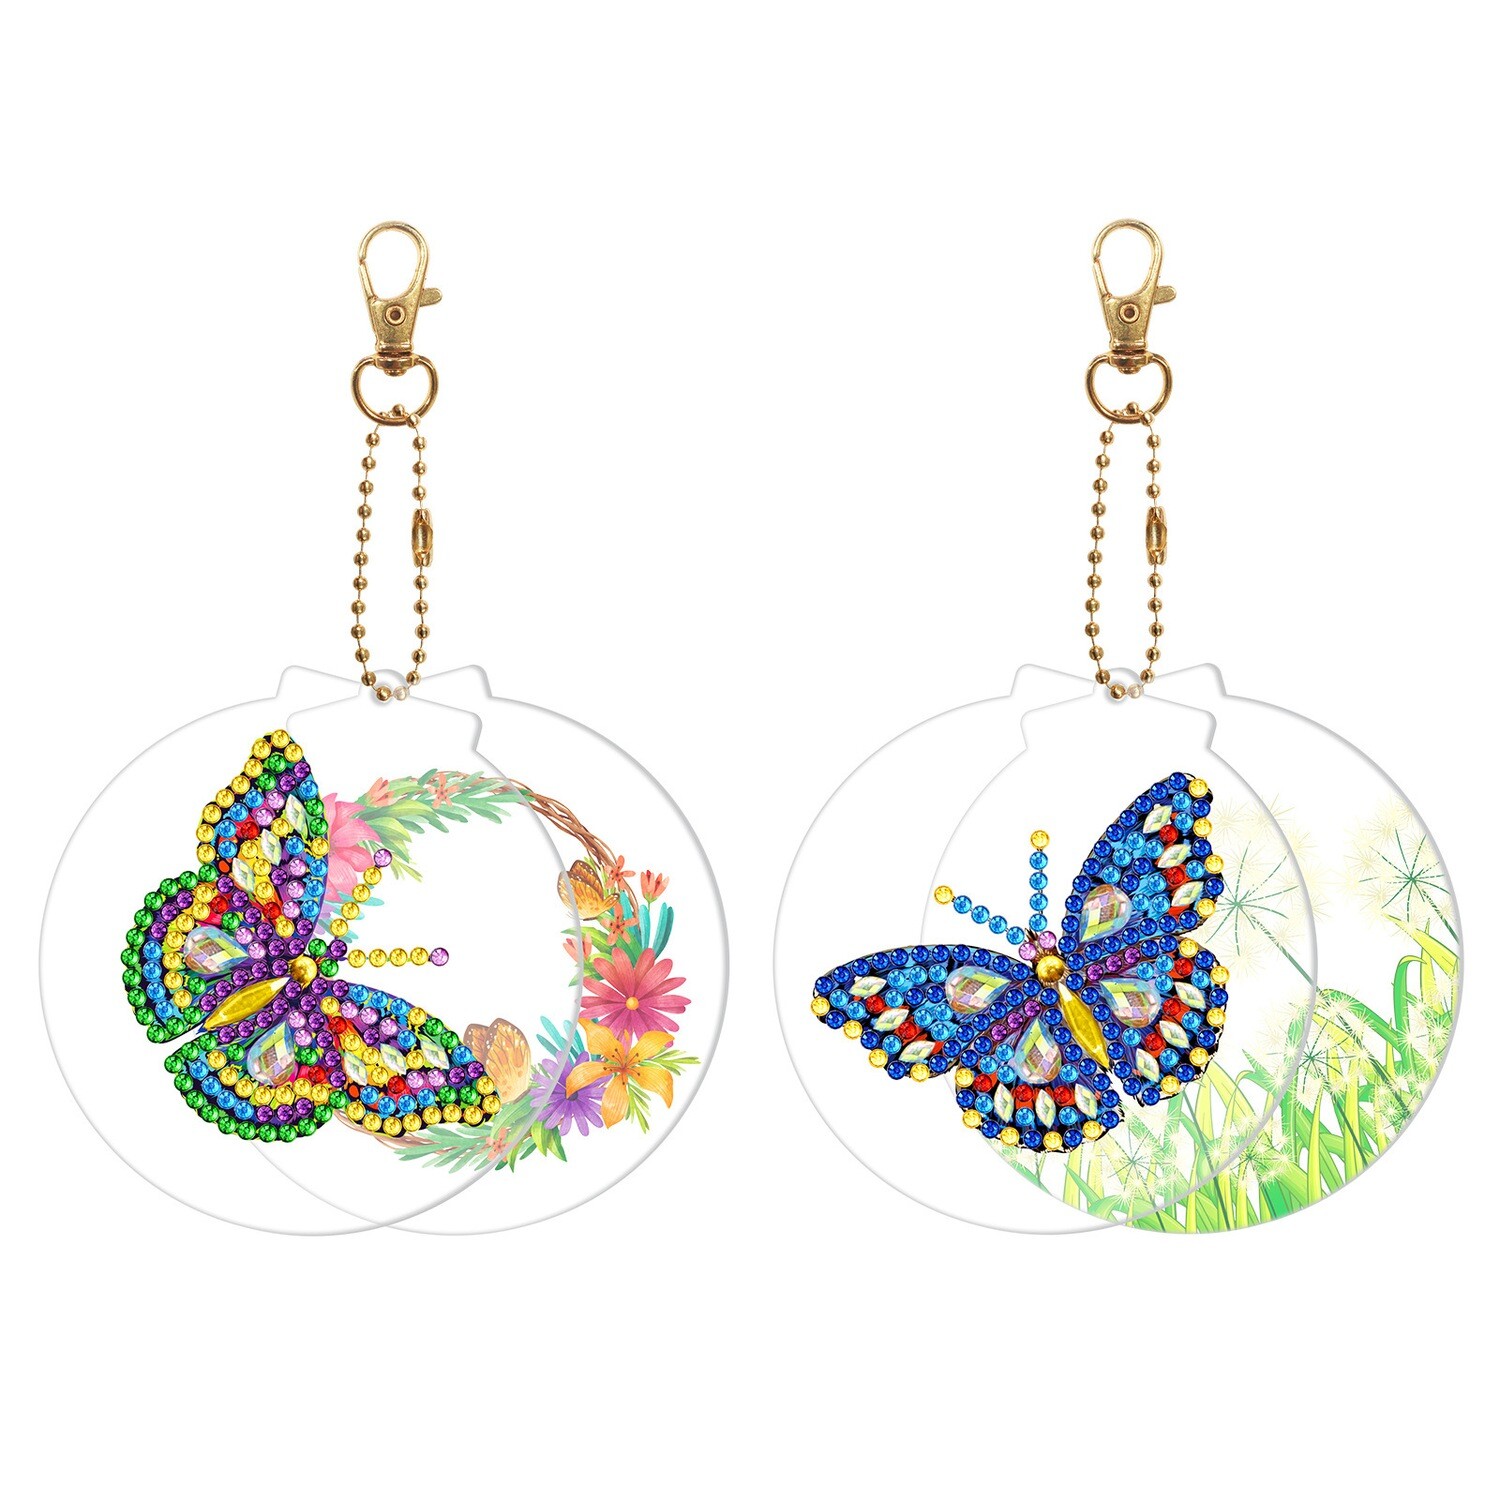 Keychains/Bag Hangers - Set of 2 - Butterfly